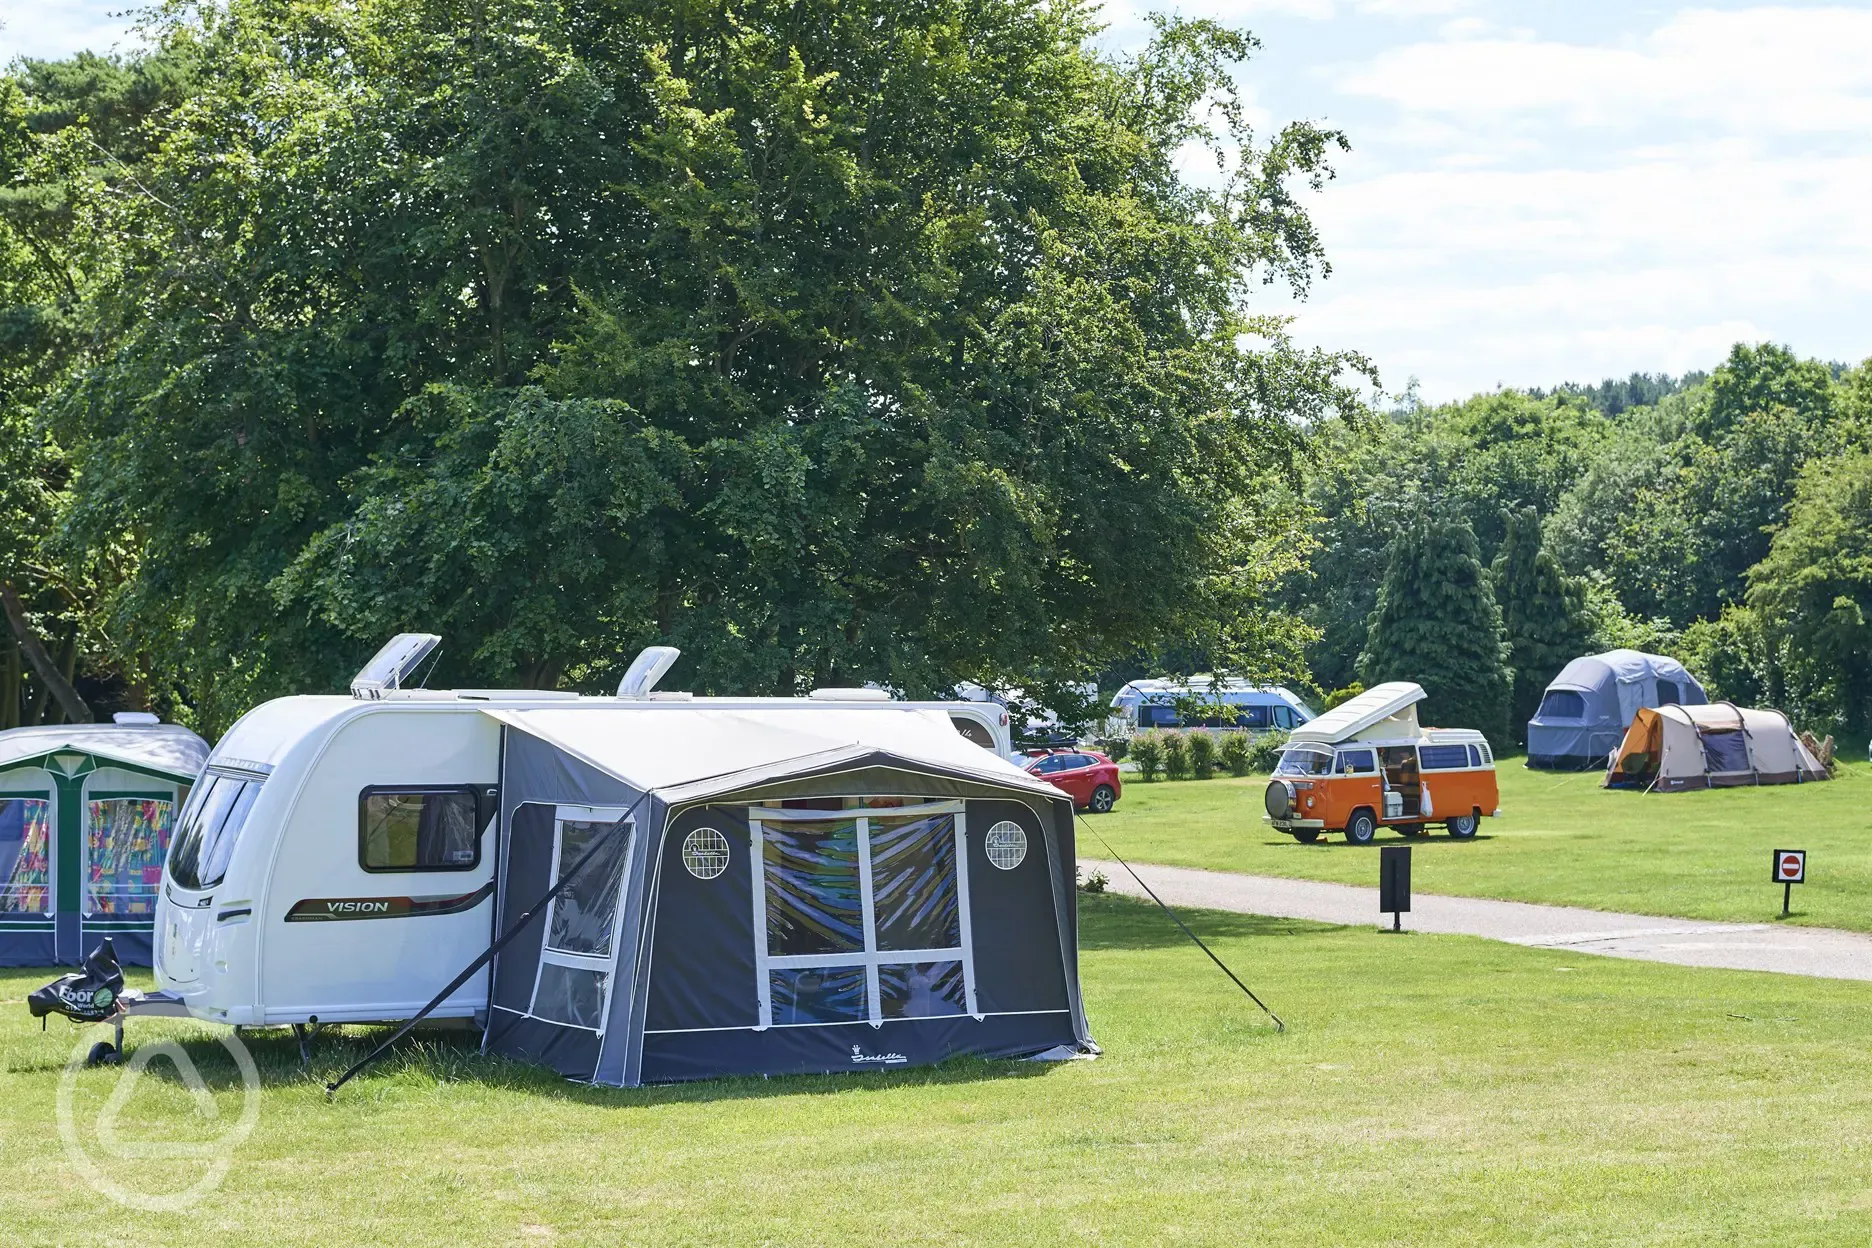 Pitches at West Runton Camping and Caravanning